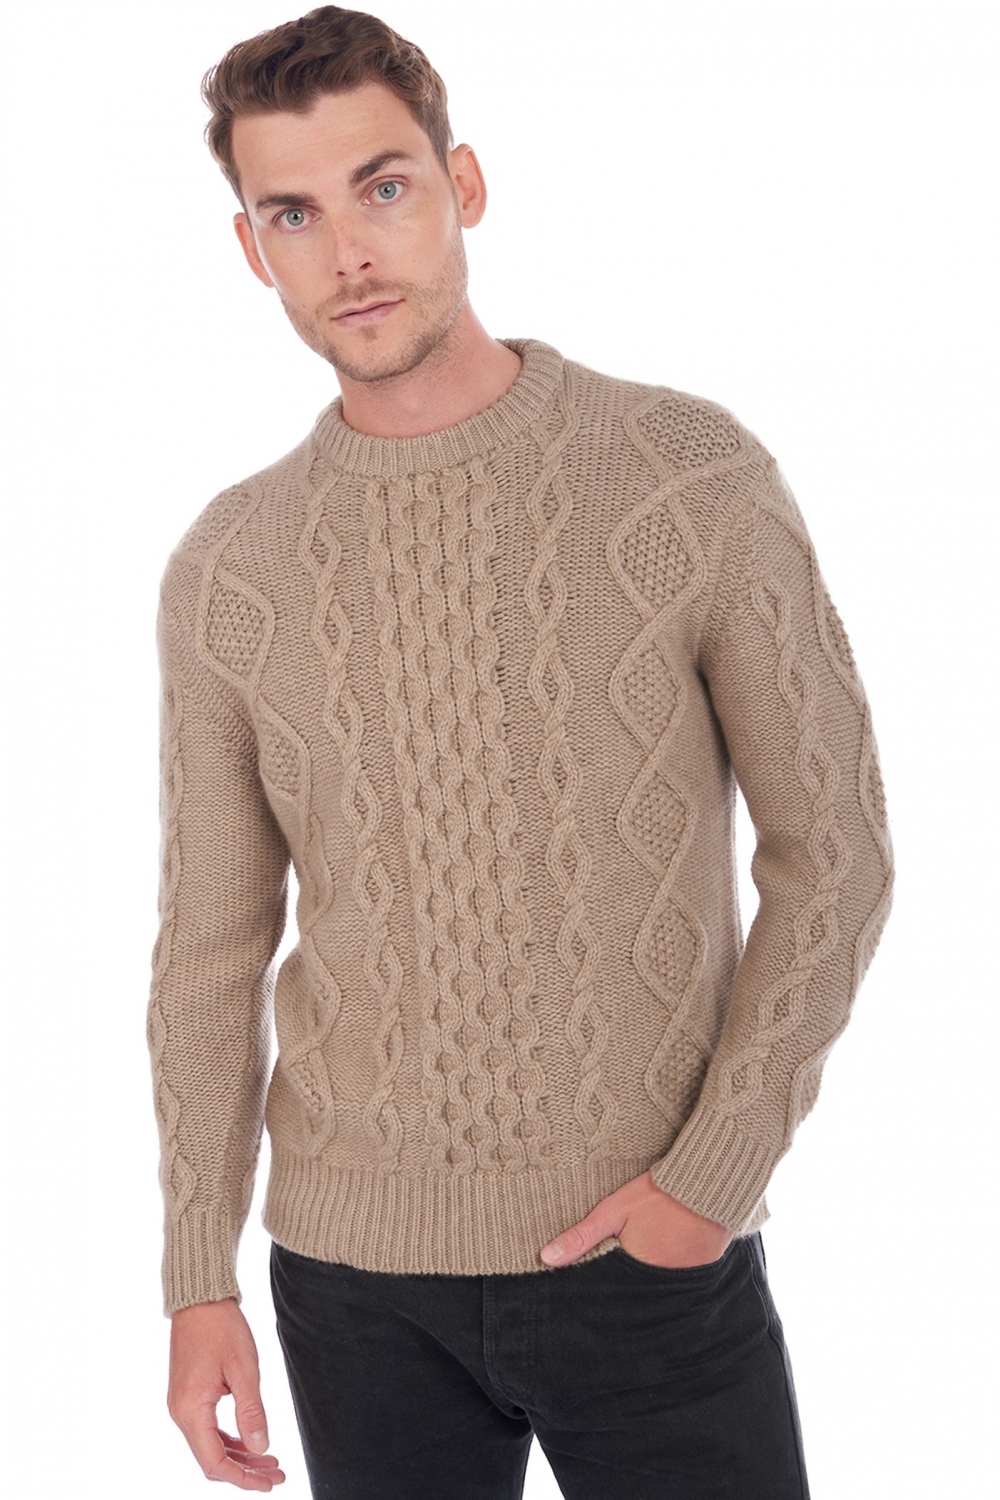 Cachemire pull homme acharnes natural stone 2xl